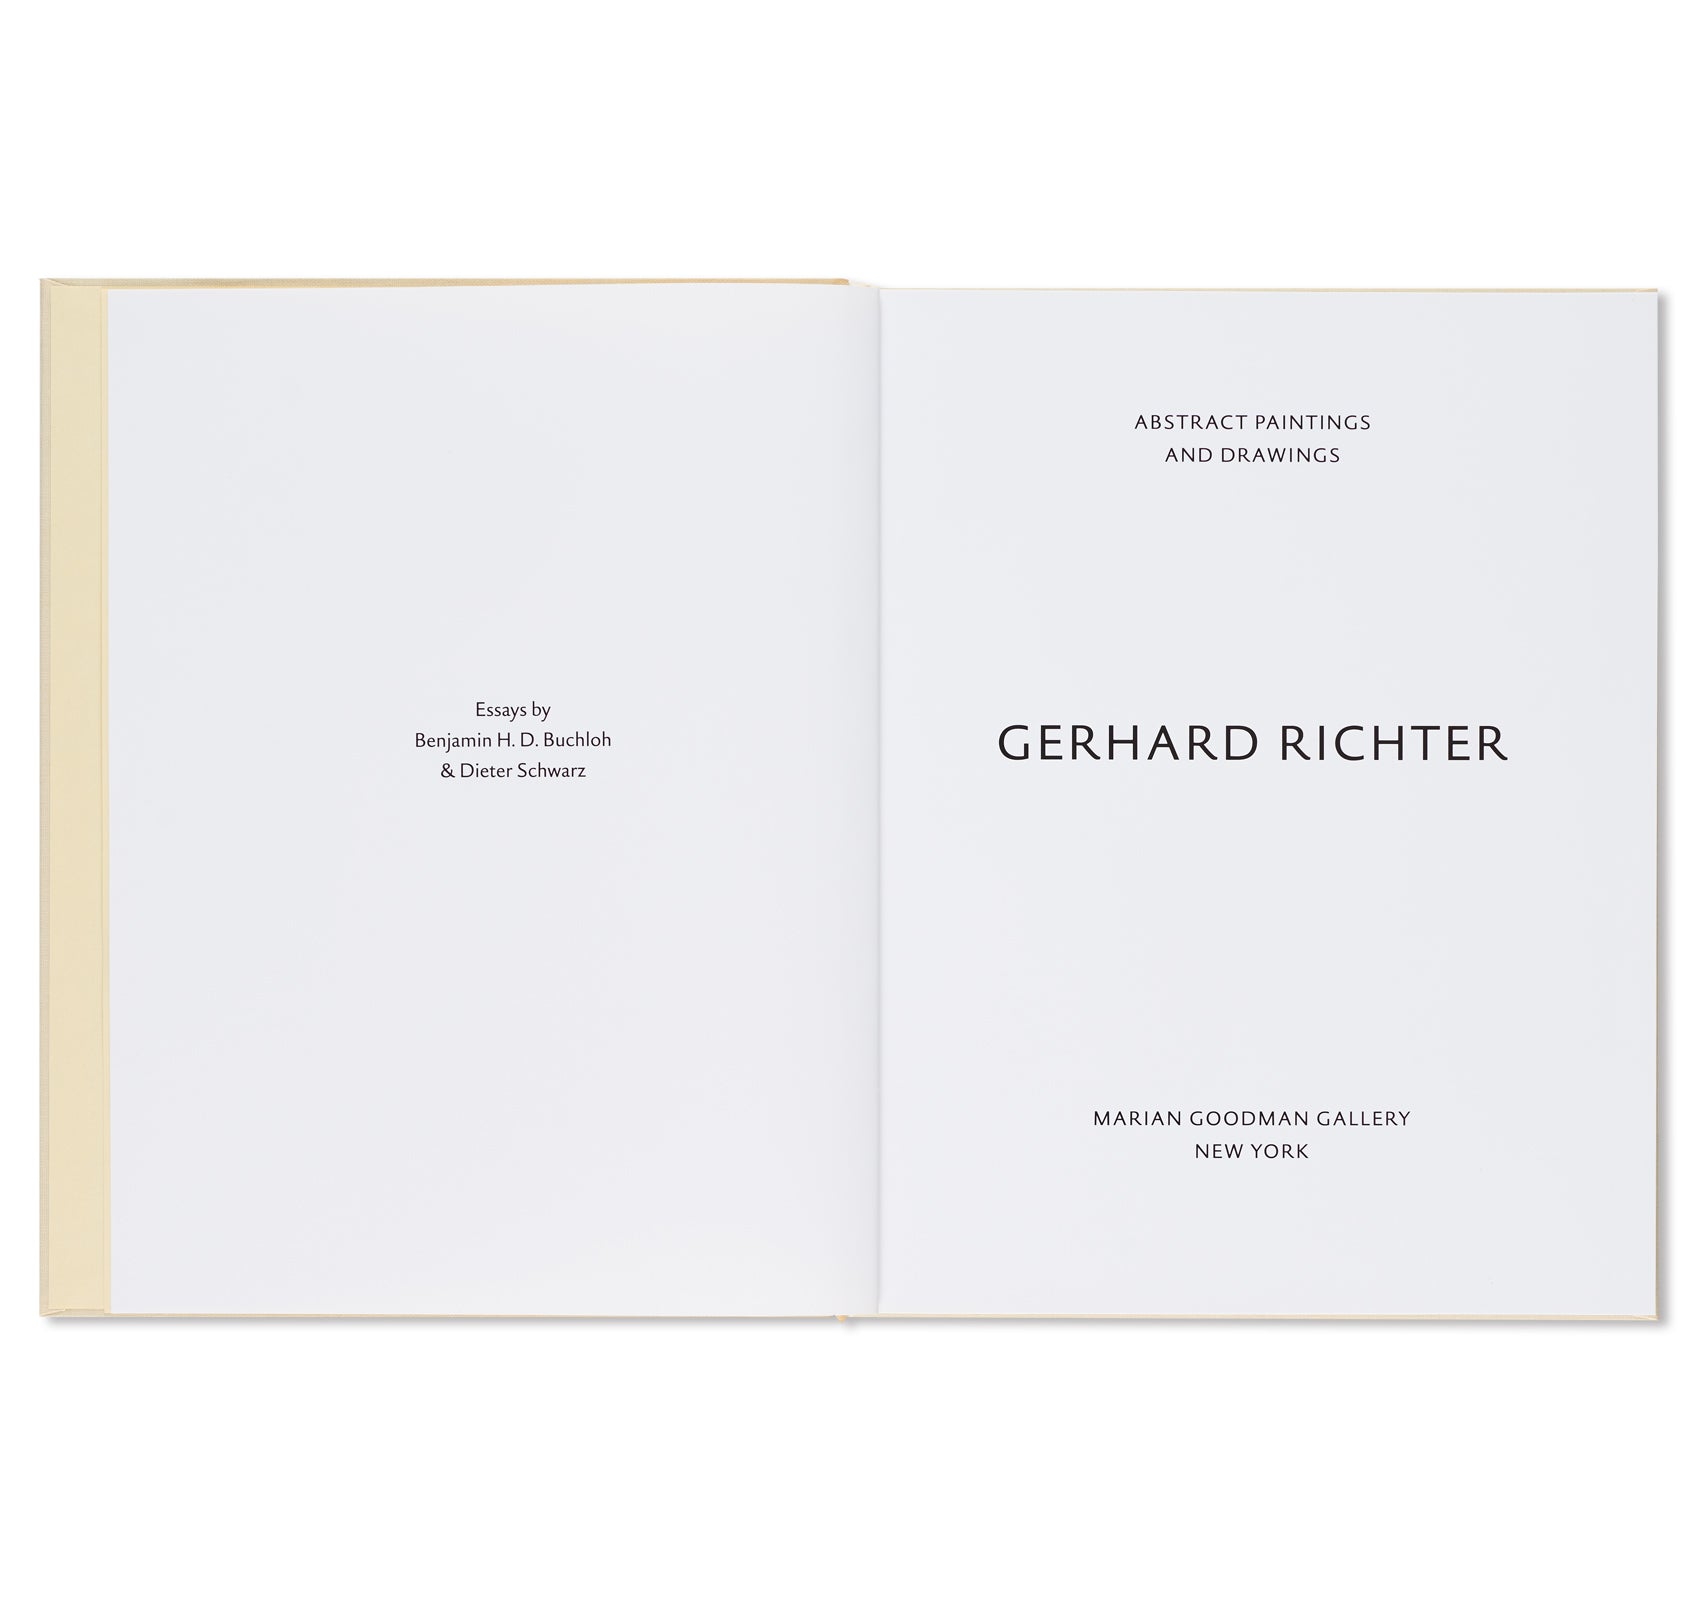 ABSTRACT PAINTINGS AND DRAWINGS by Gerhard Richter